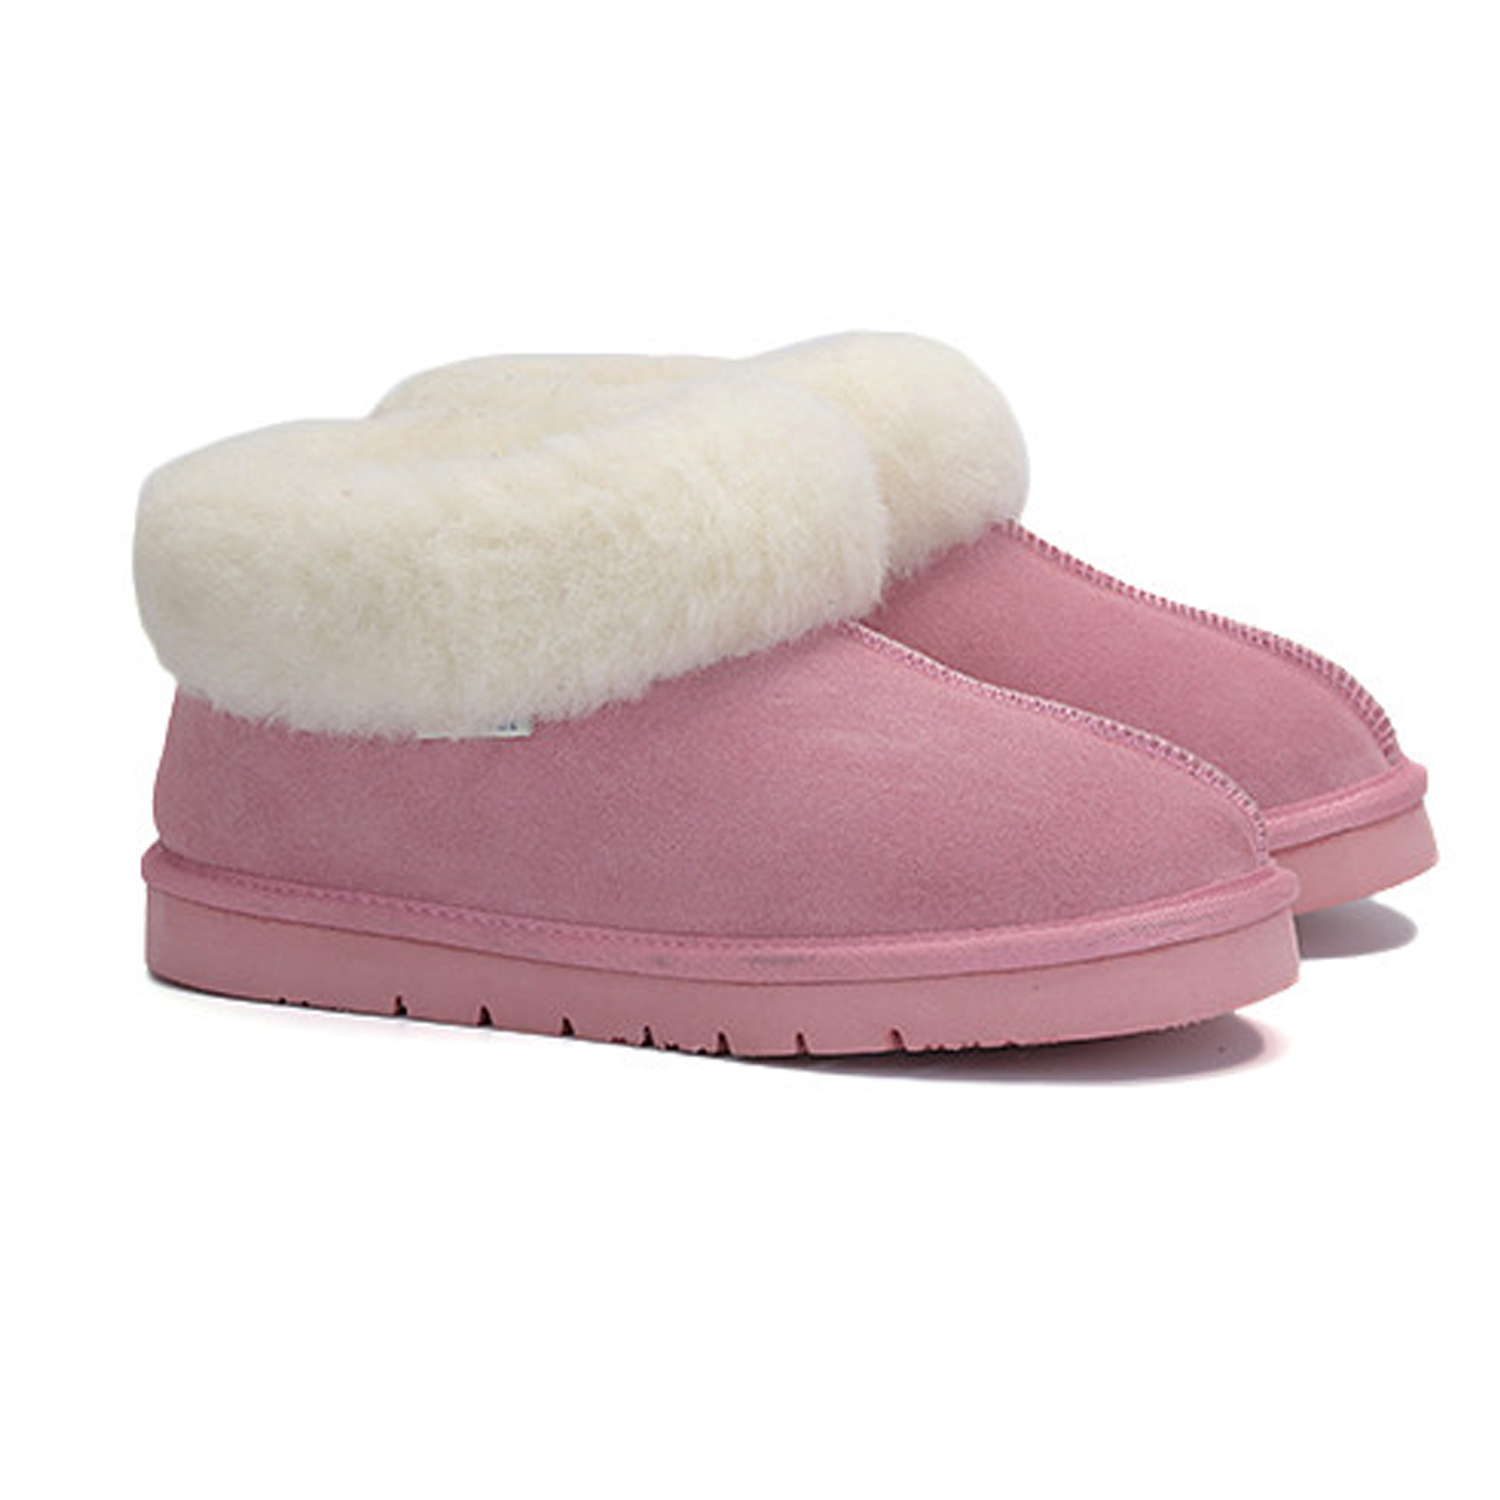 Women's Pink Leahter Winter Snow Boots